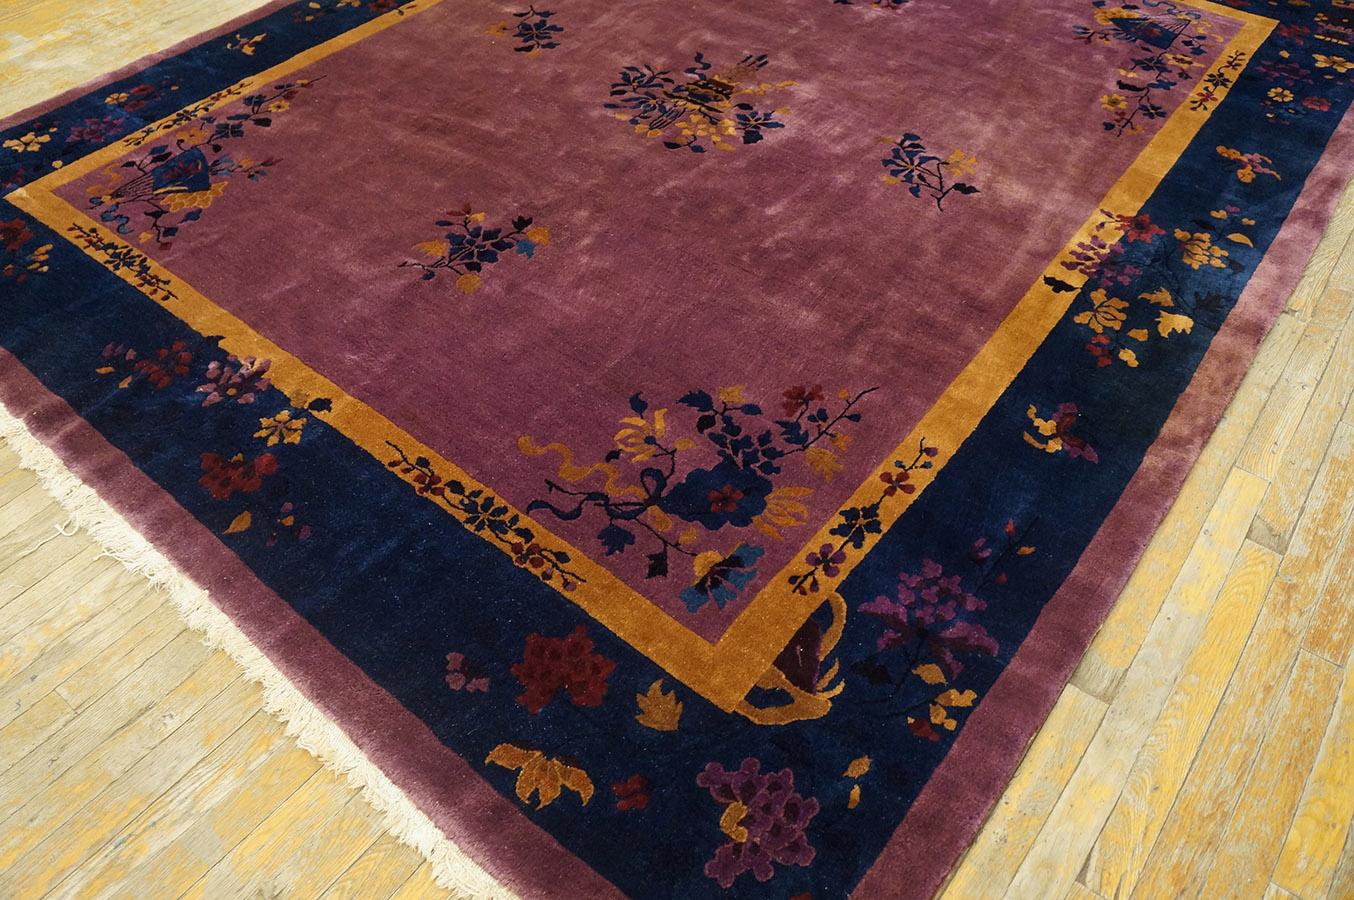 1920s Chinese Art Deco Carpet ( 8' x 9' 8'' - 245 x 295 cm ) In Good Condition For Sale In New York, NY